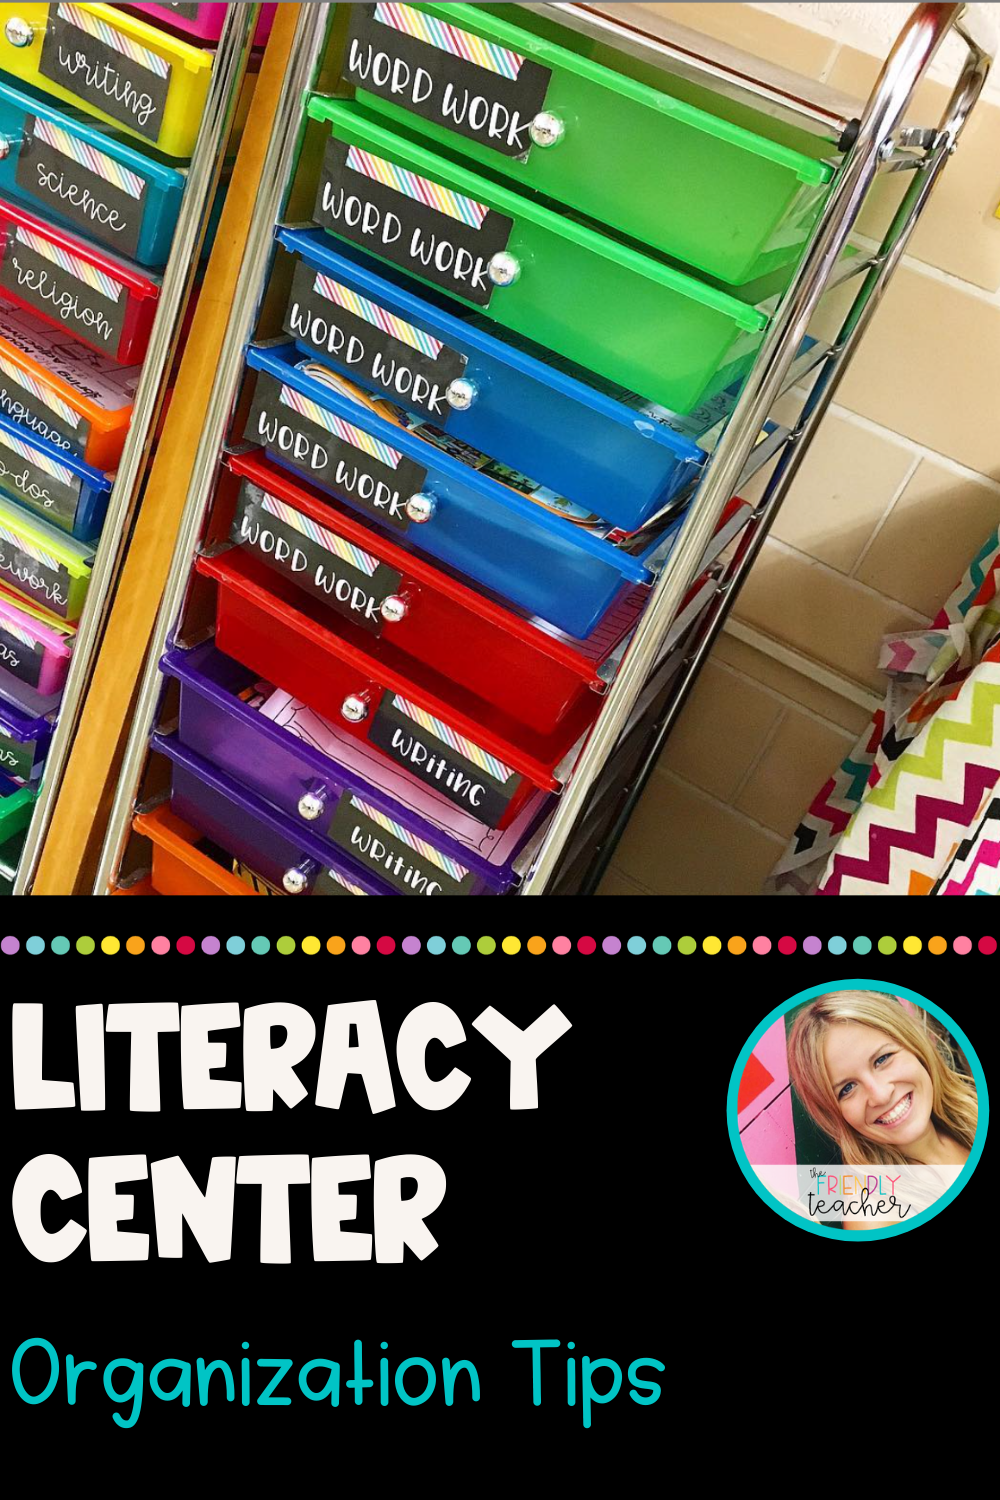 Organizing reading centers in Upper Elementary